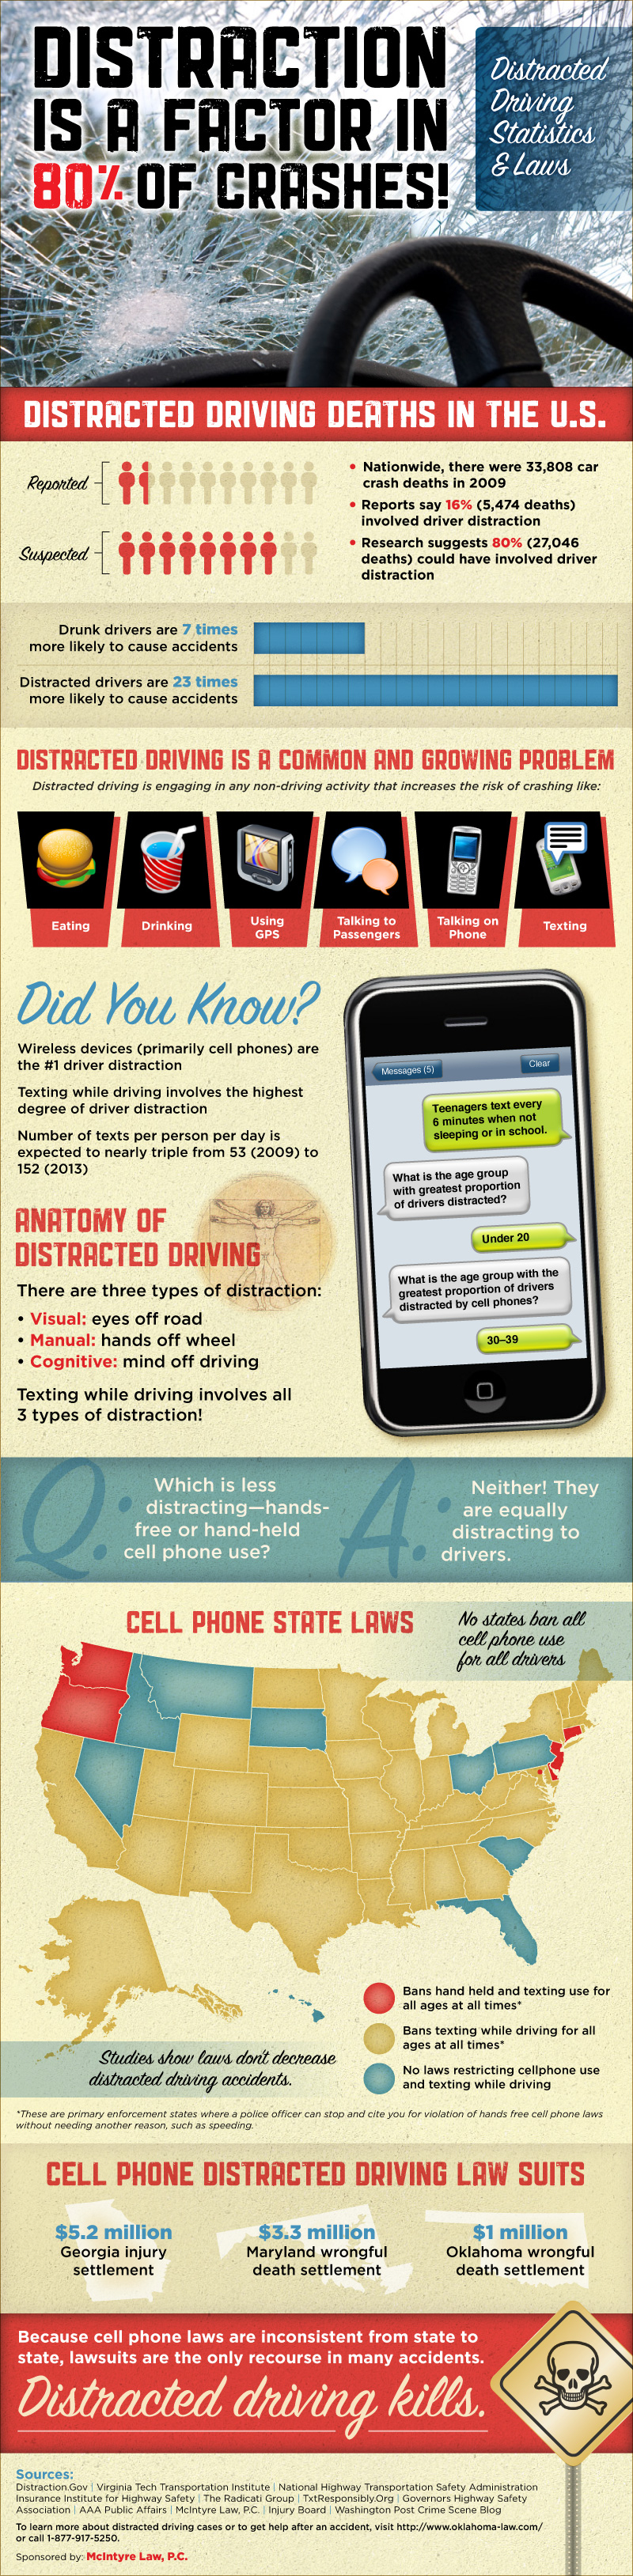 Distracted Driving Facts